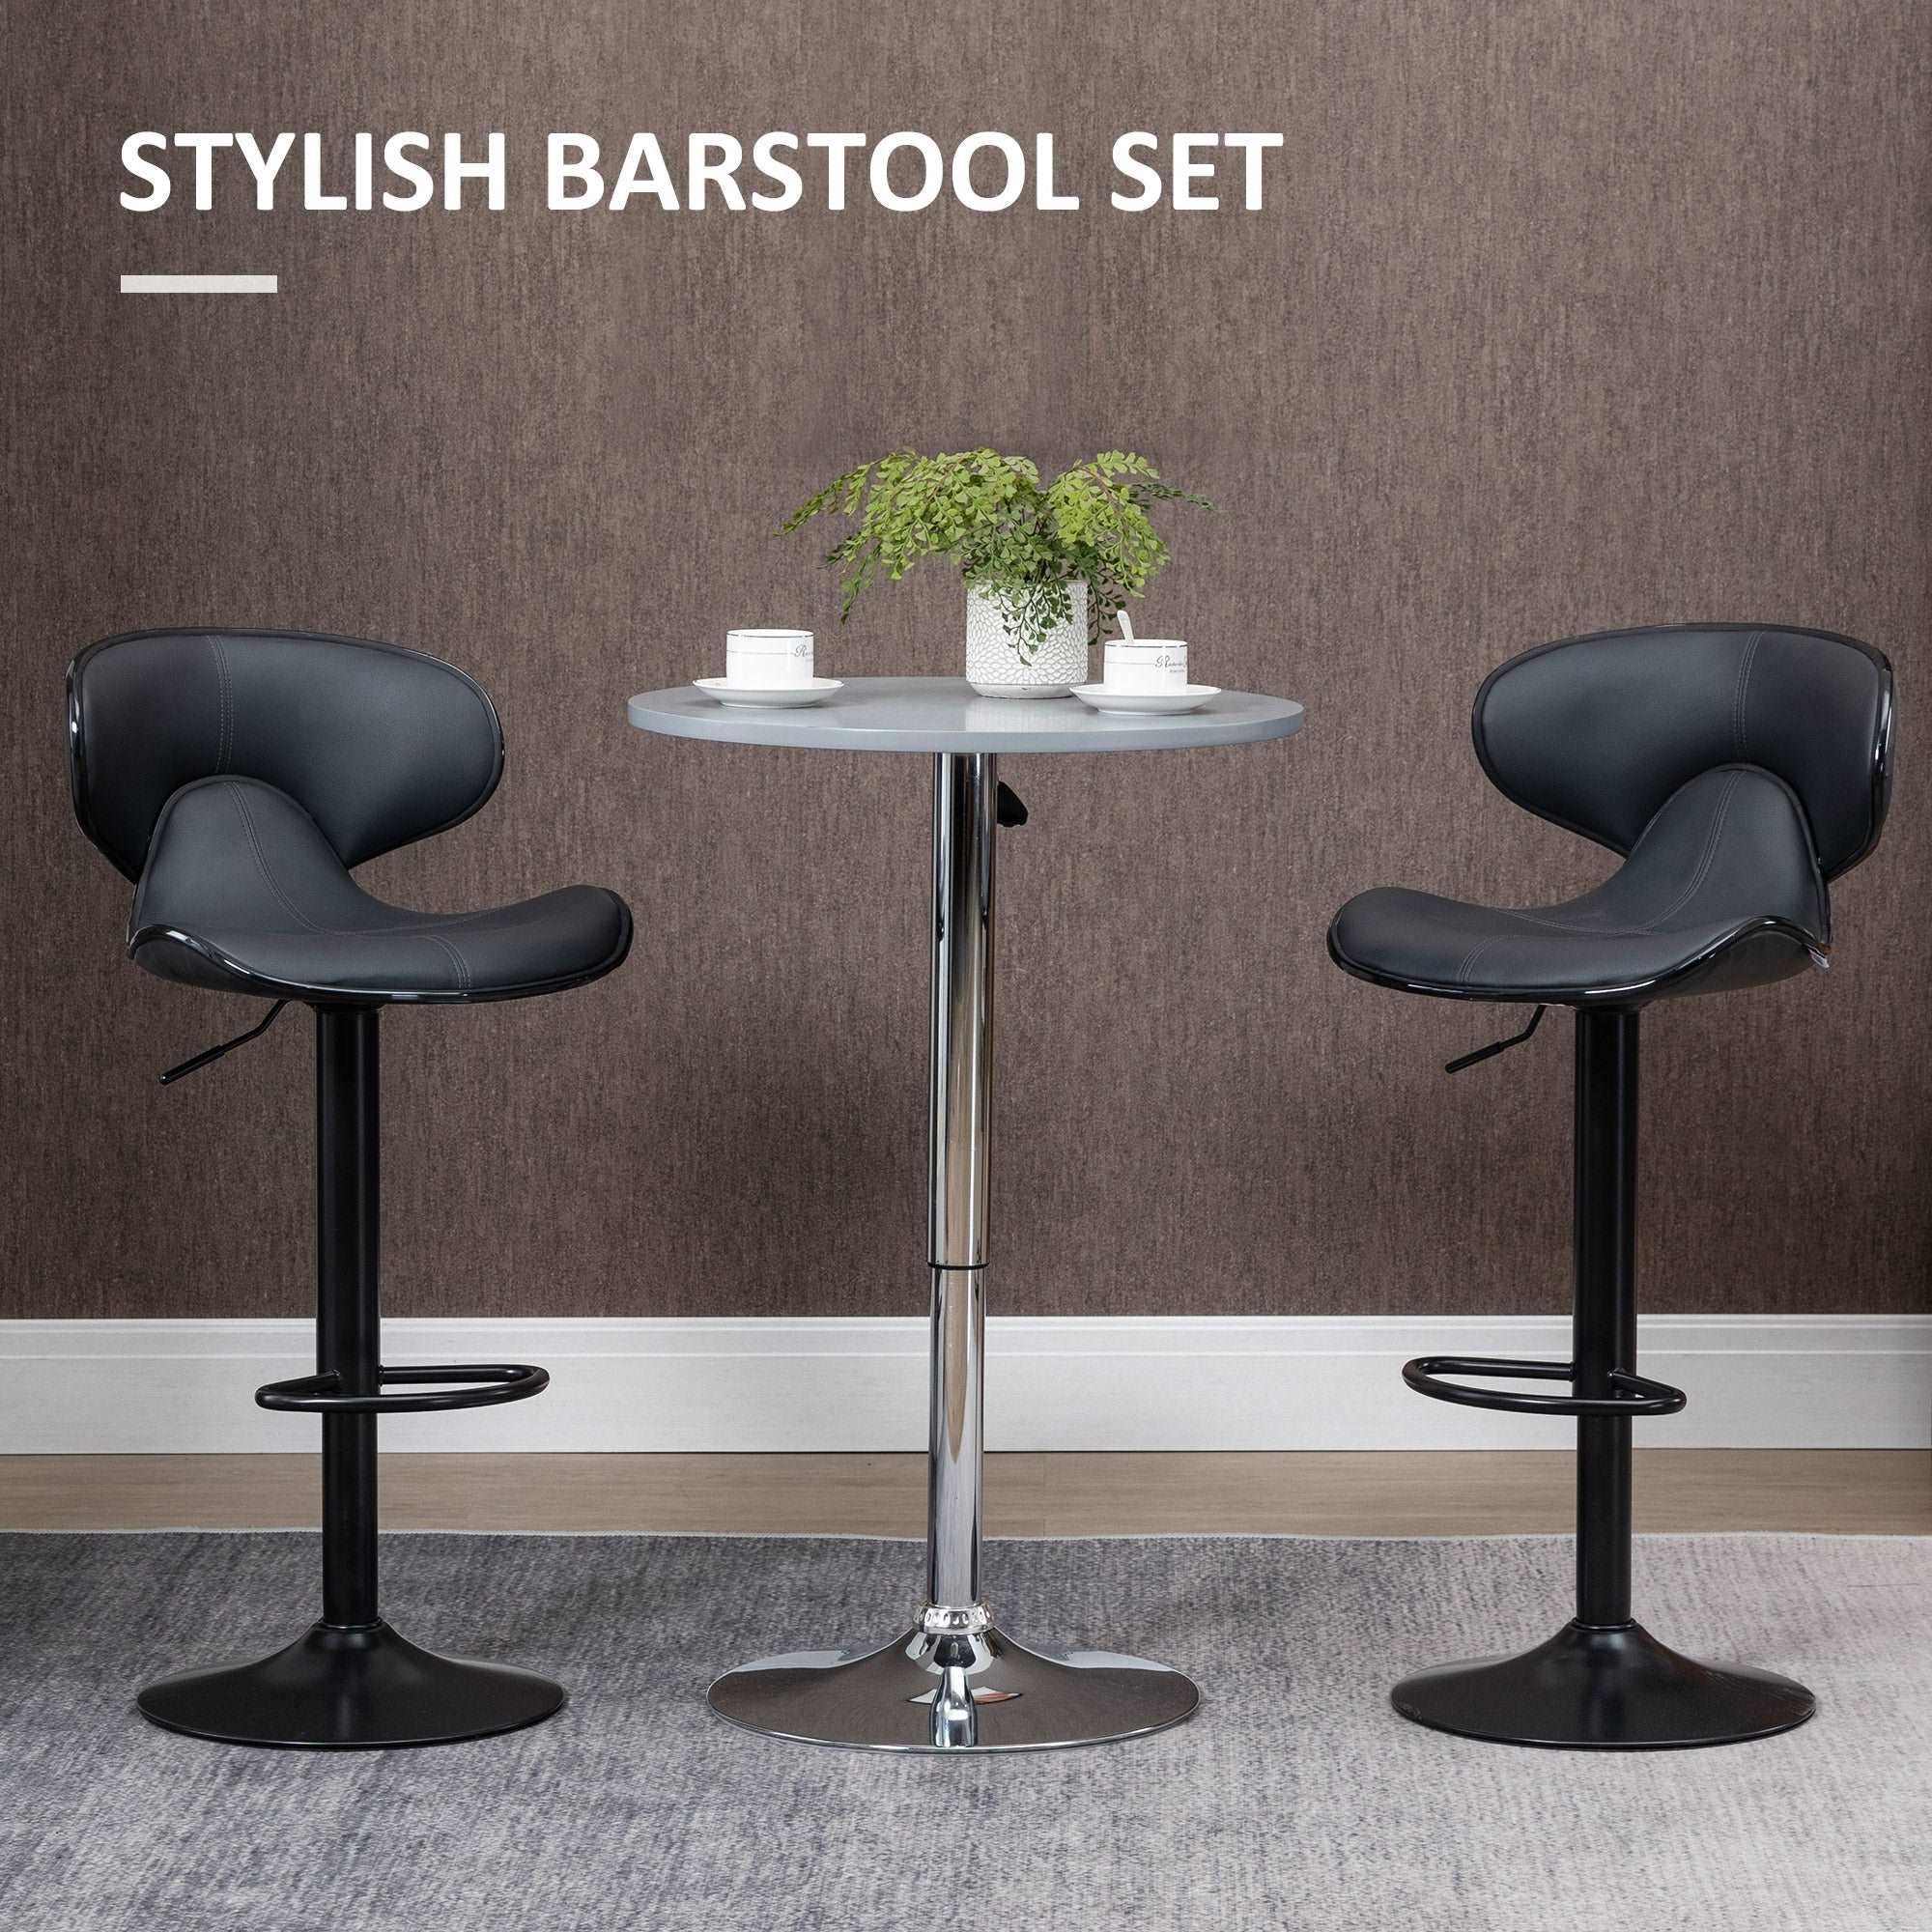 Adjustable Swivel Bar Stools Set of 2, Barstools with Footrest and Backrest, Steel Frame Gas Lift, for Kitchen Counter Dining Room, Grey  AOSOM   